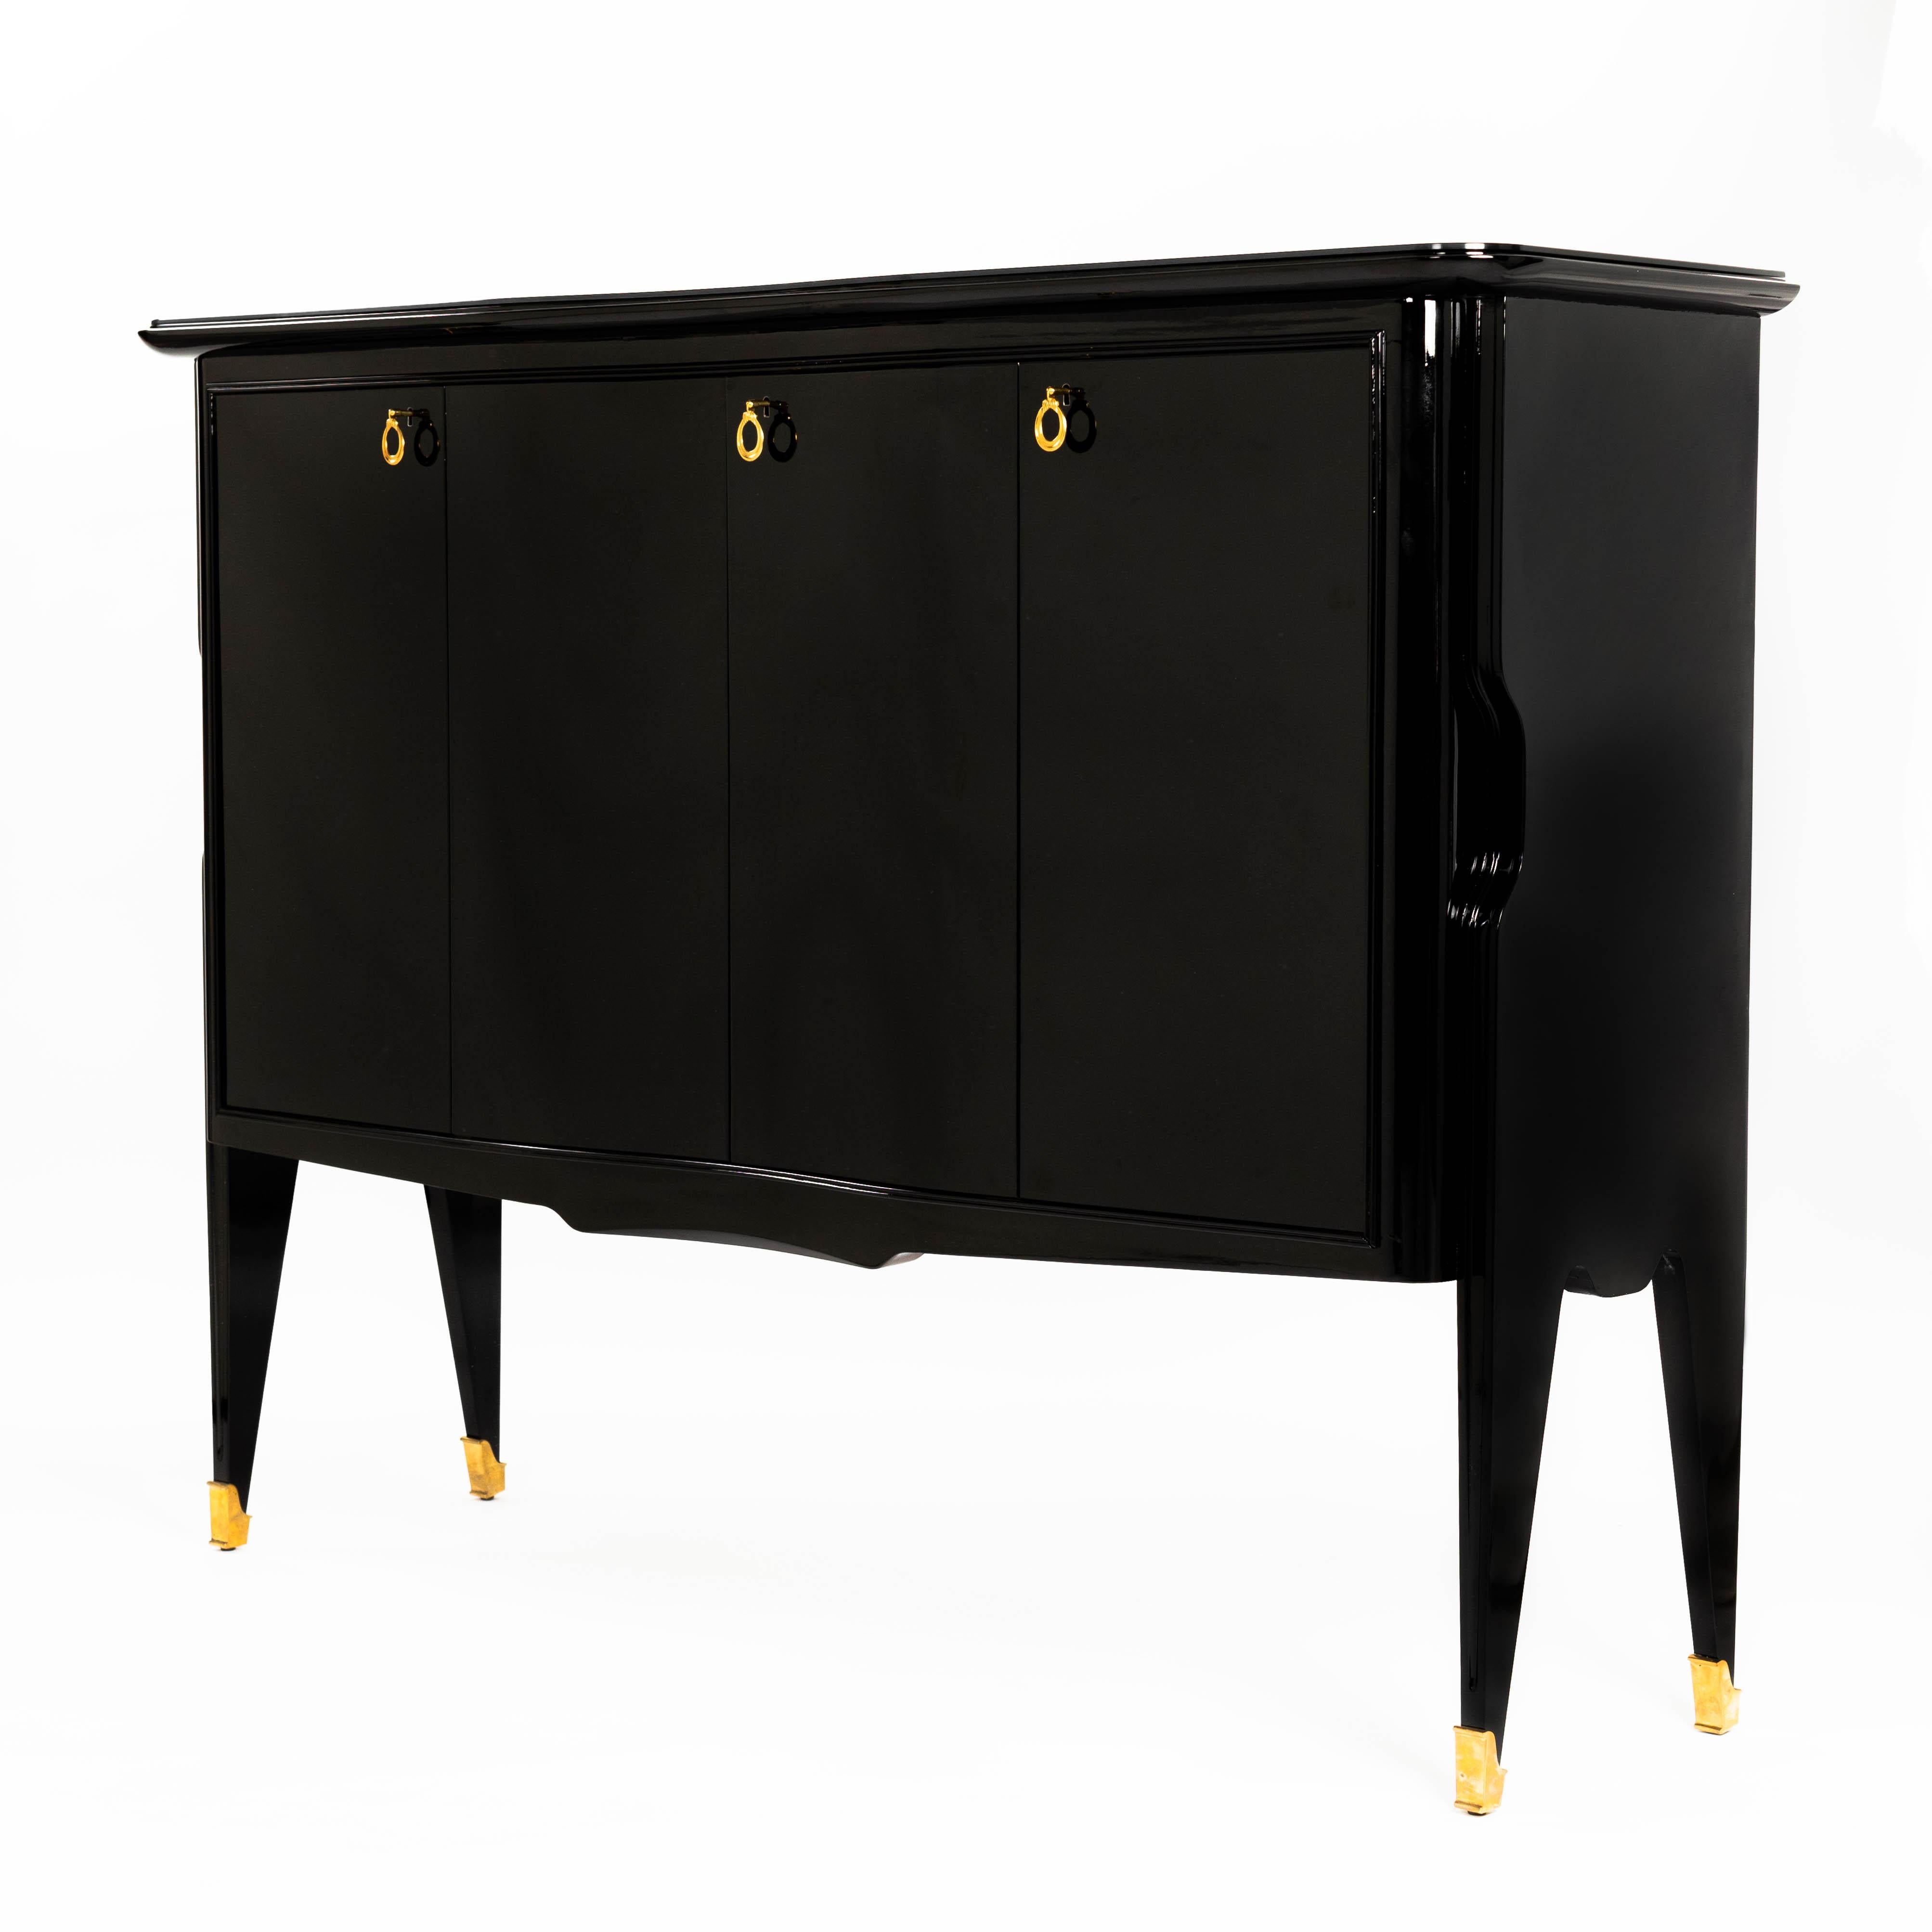 Elegant four-door sideboard - mid-century credenza, attributed to Vittorio Dassi, Italy.
(Vittorio Dassi 1893-1973)
Sycamore solid wood lacquered in high gloss black, the top of the furniture is protected with a loose laid black glass top and you